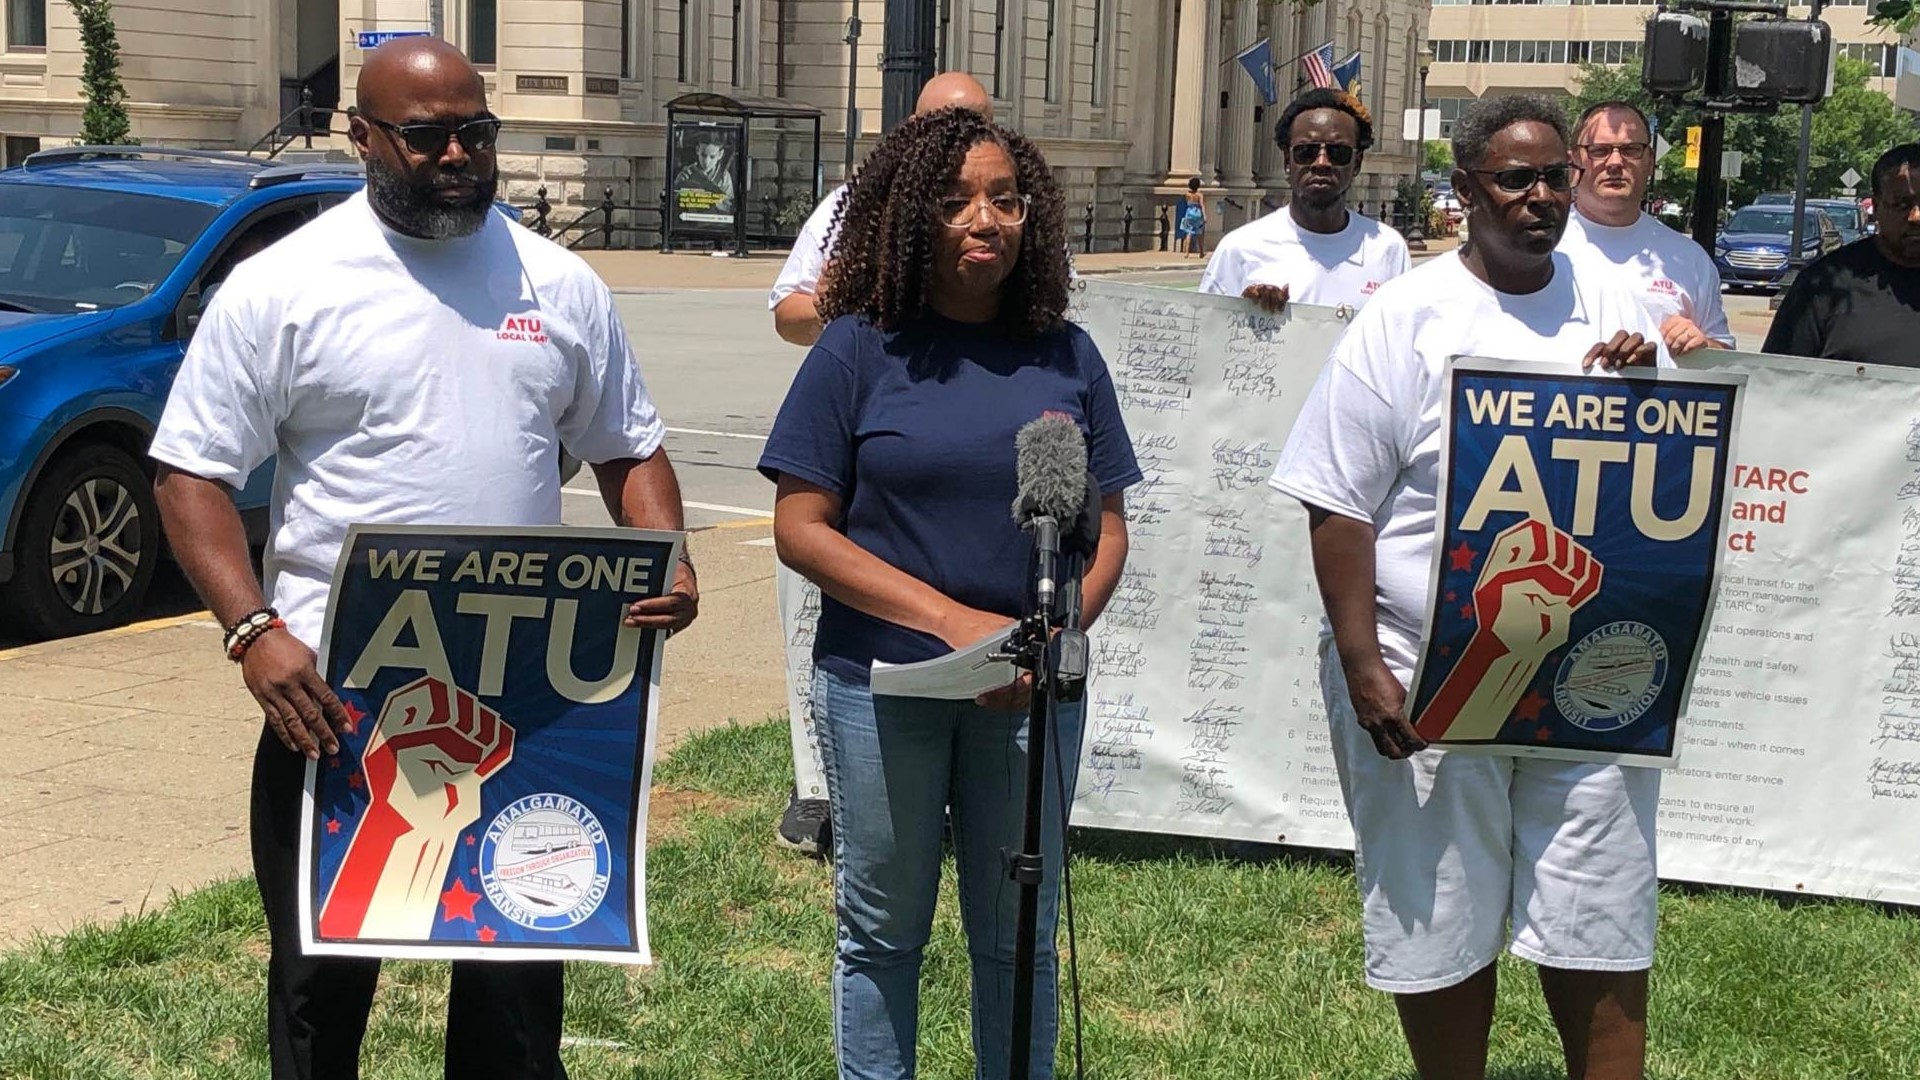 TARC employees are demanding a safe workplace and a fair contract.